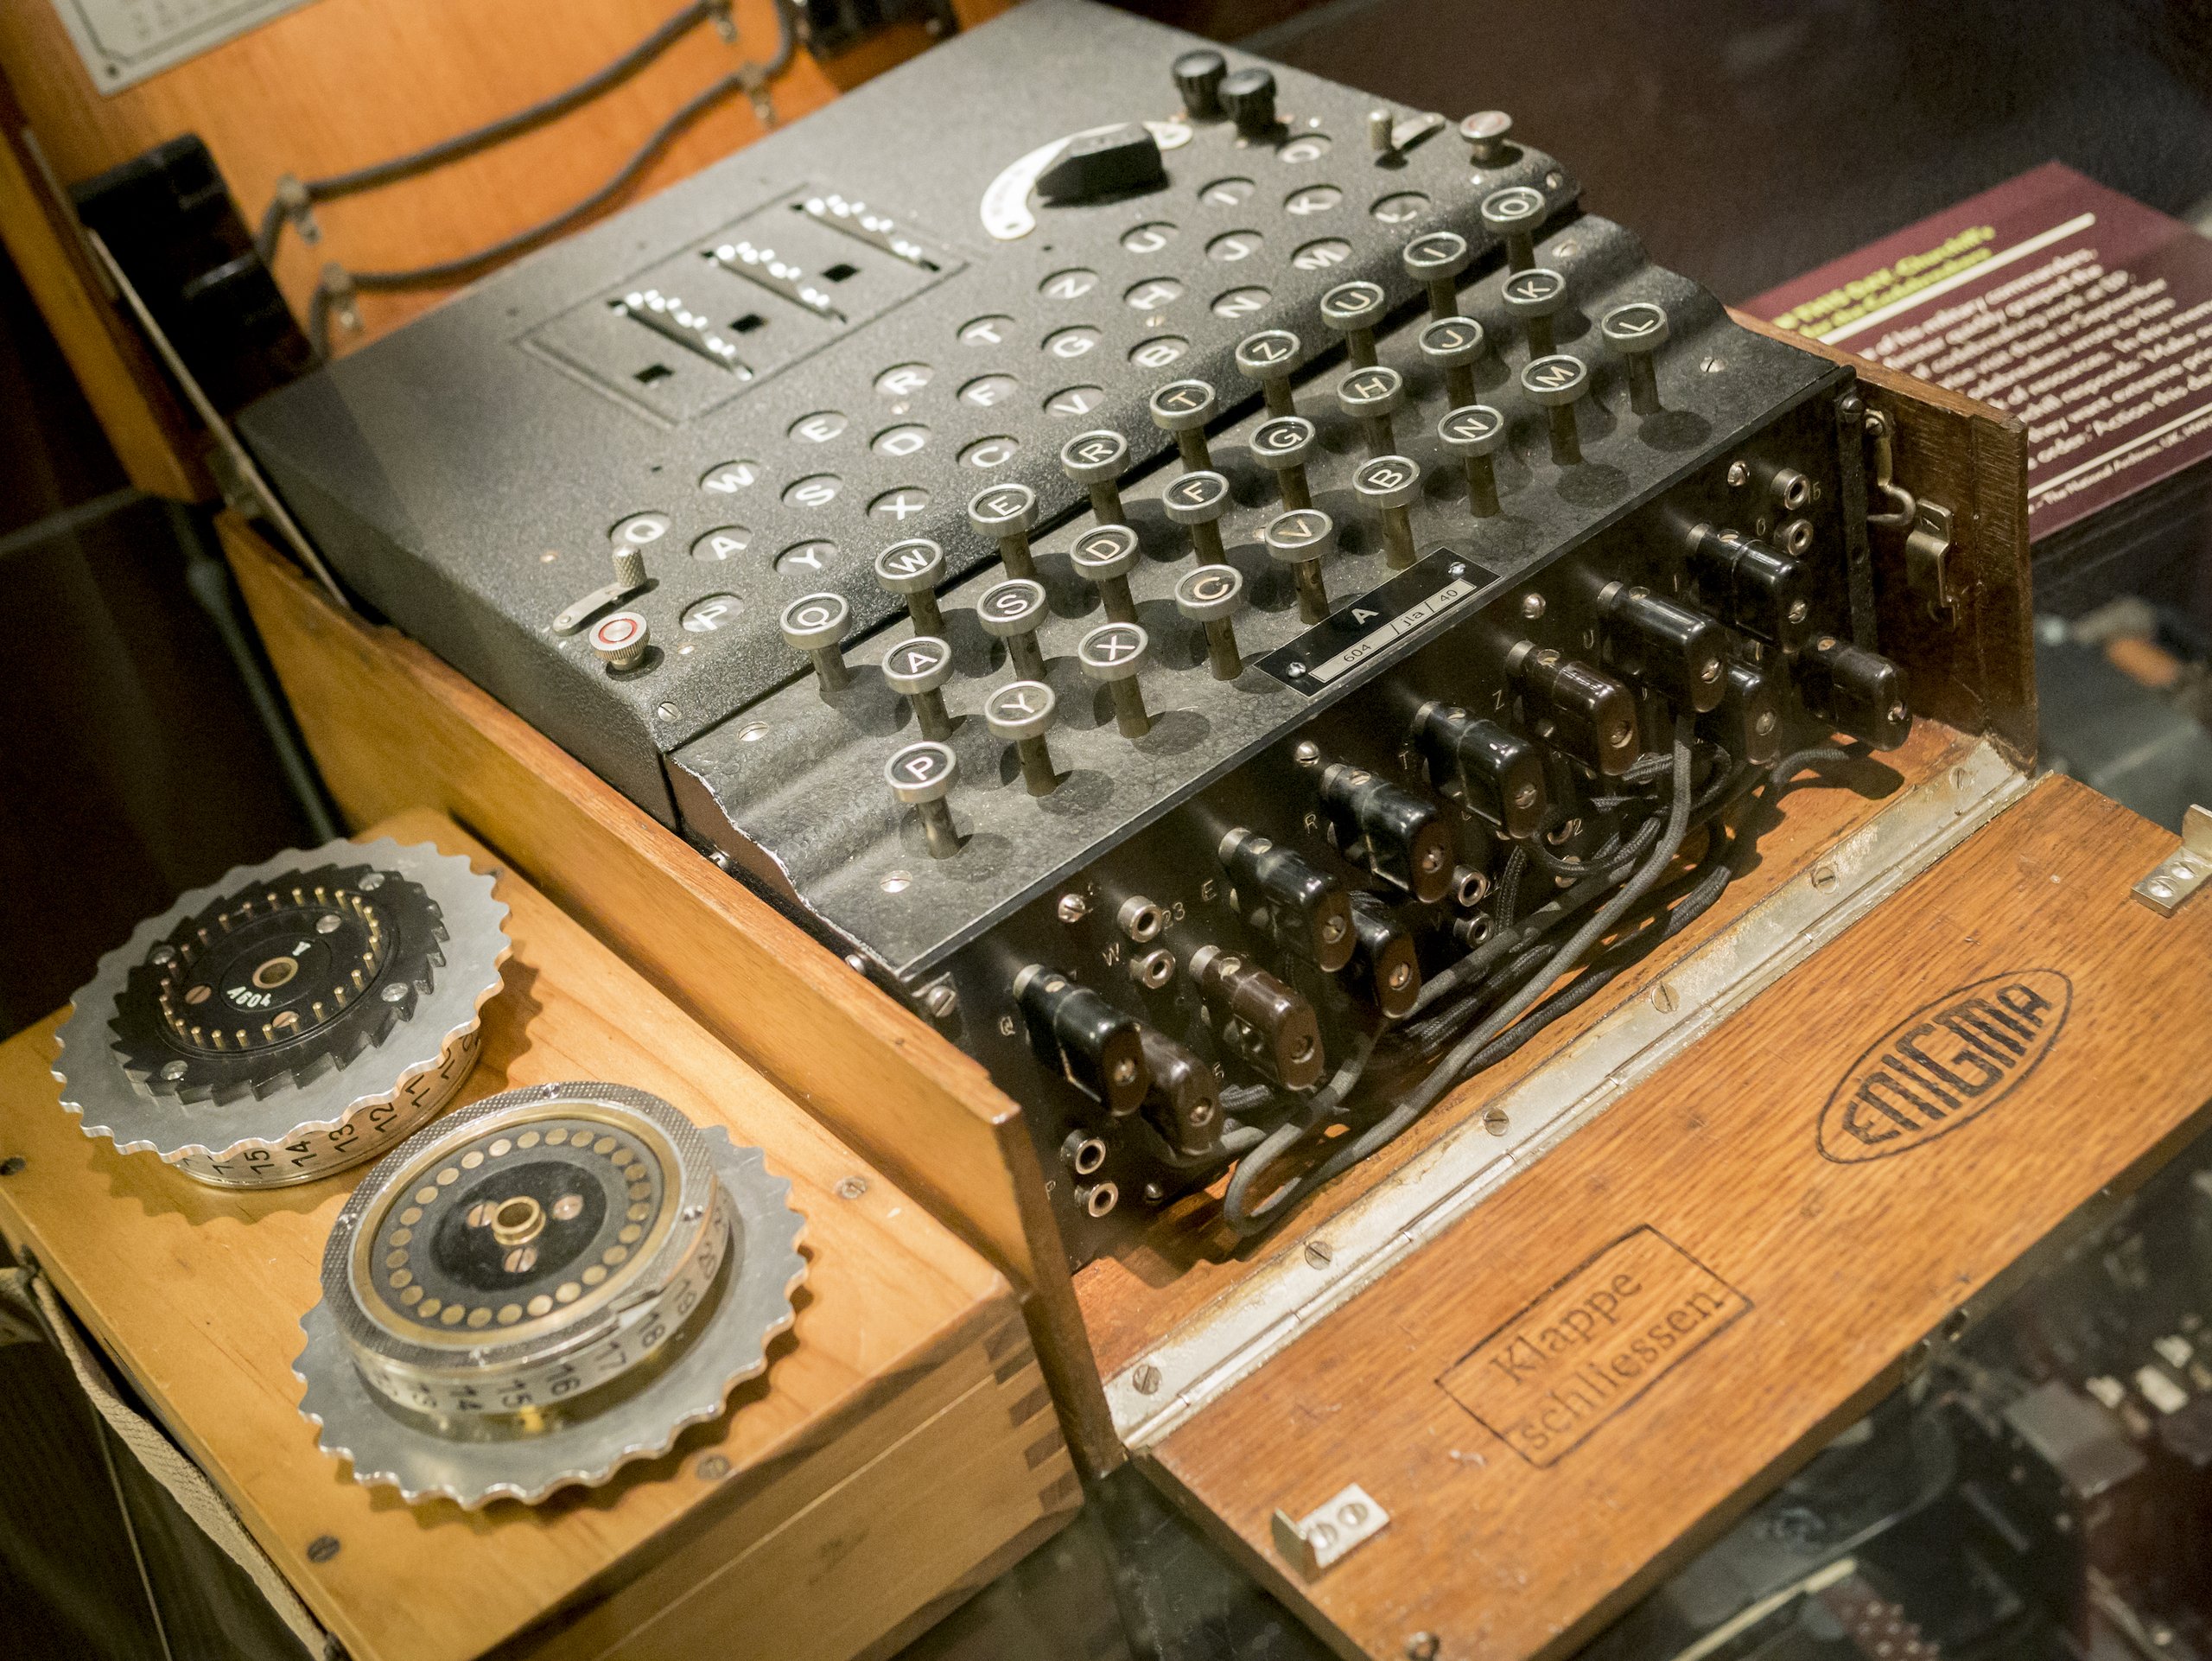 The Enigma Code Breakers Who Saved the World - The Objective Standard